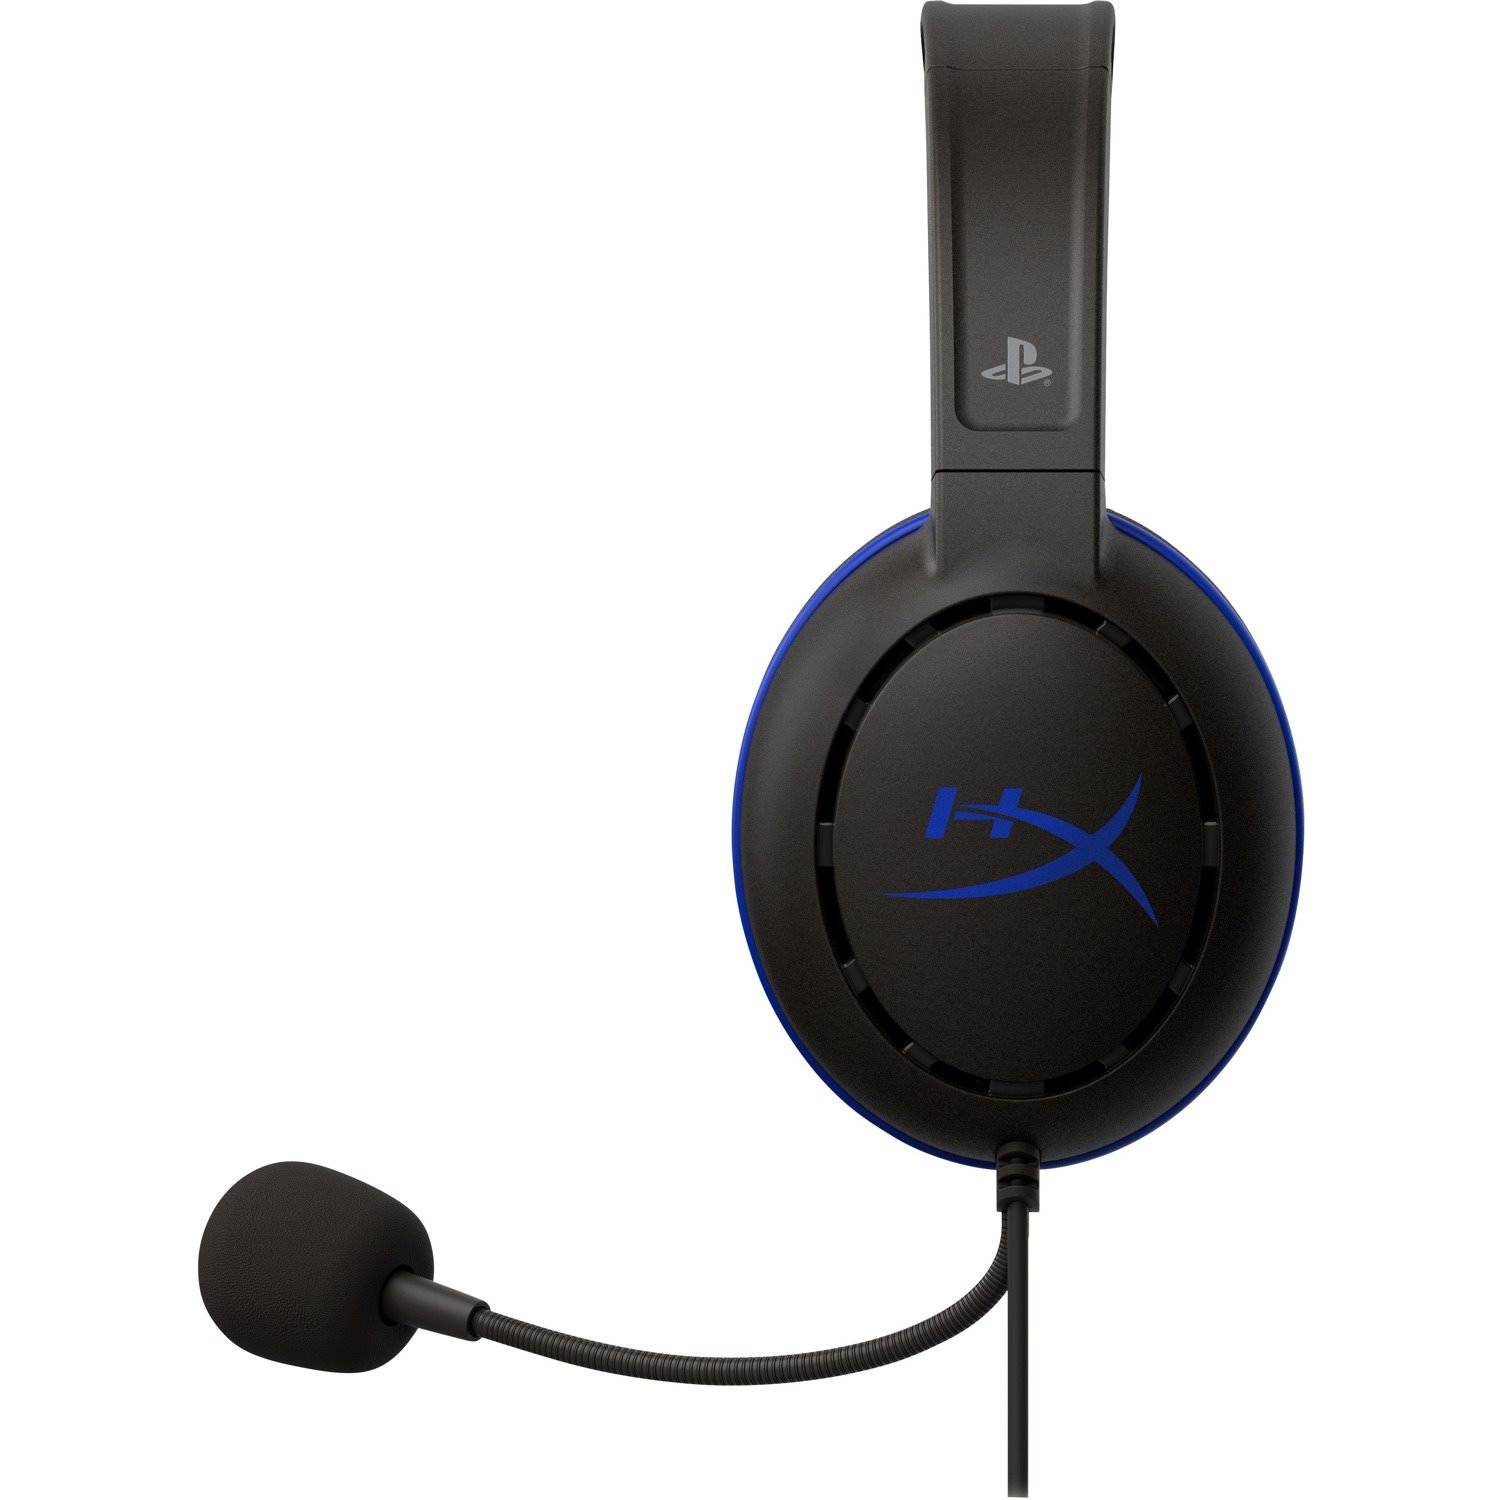 HyperX Cloud Chat Wired Over-the-head Mono Gaming Headset - Blue/Black